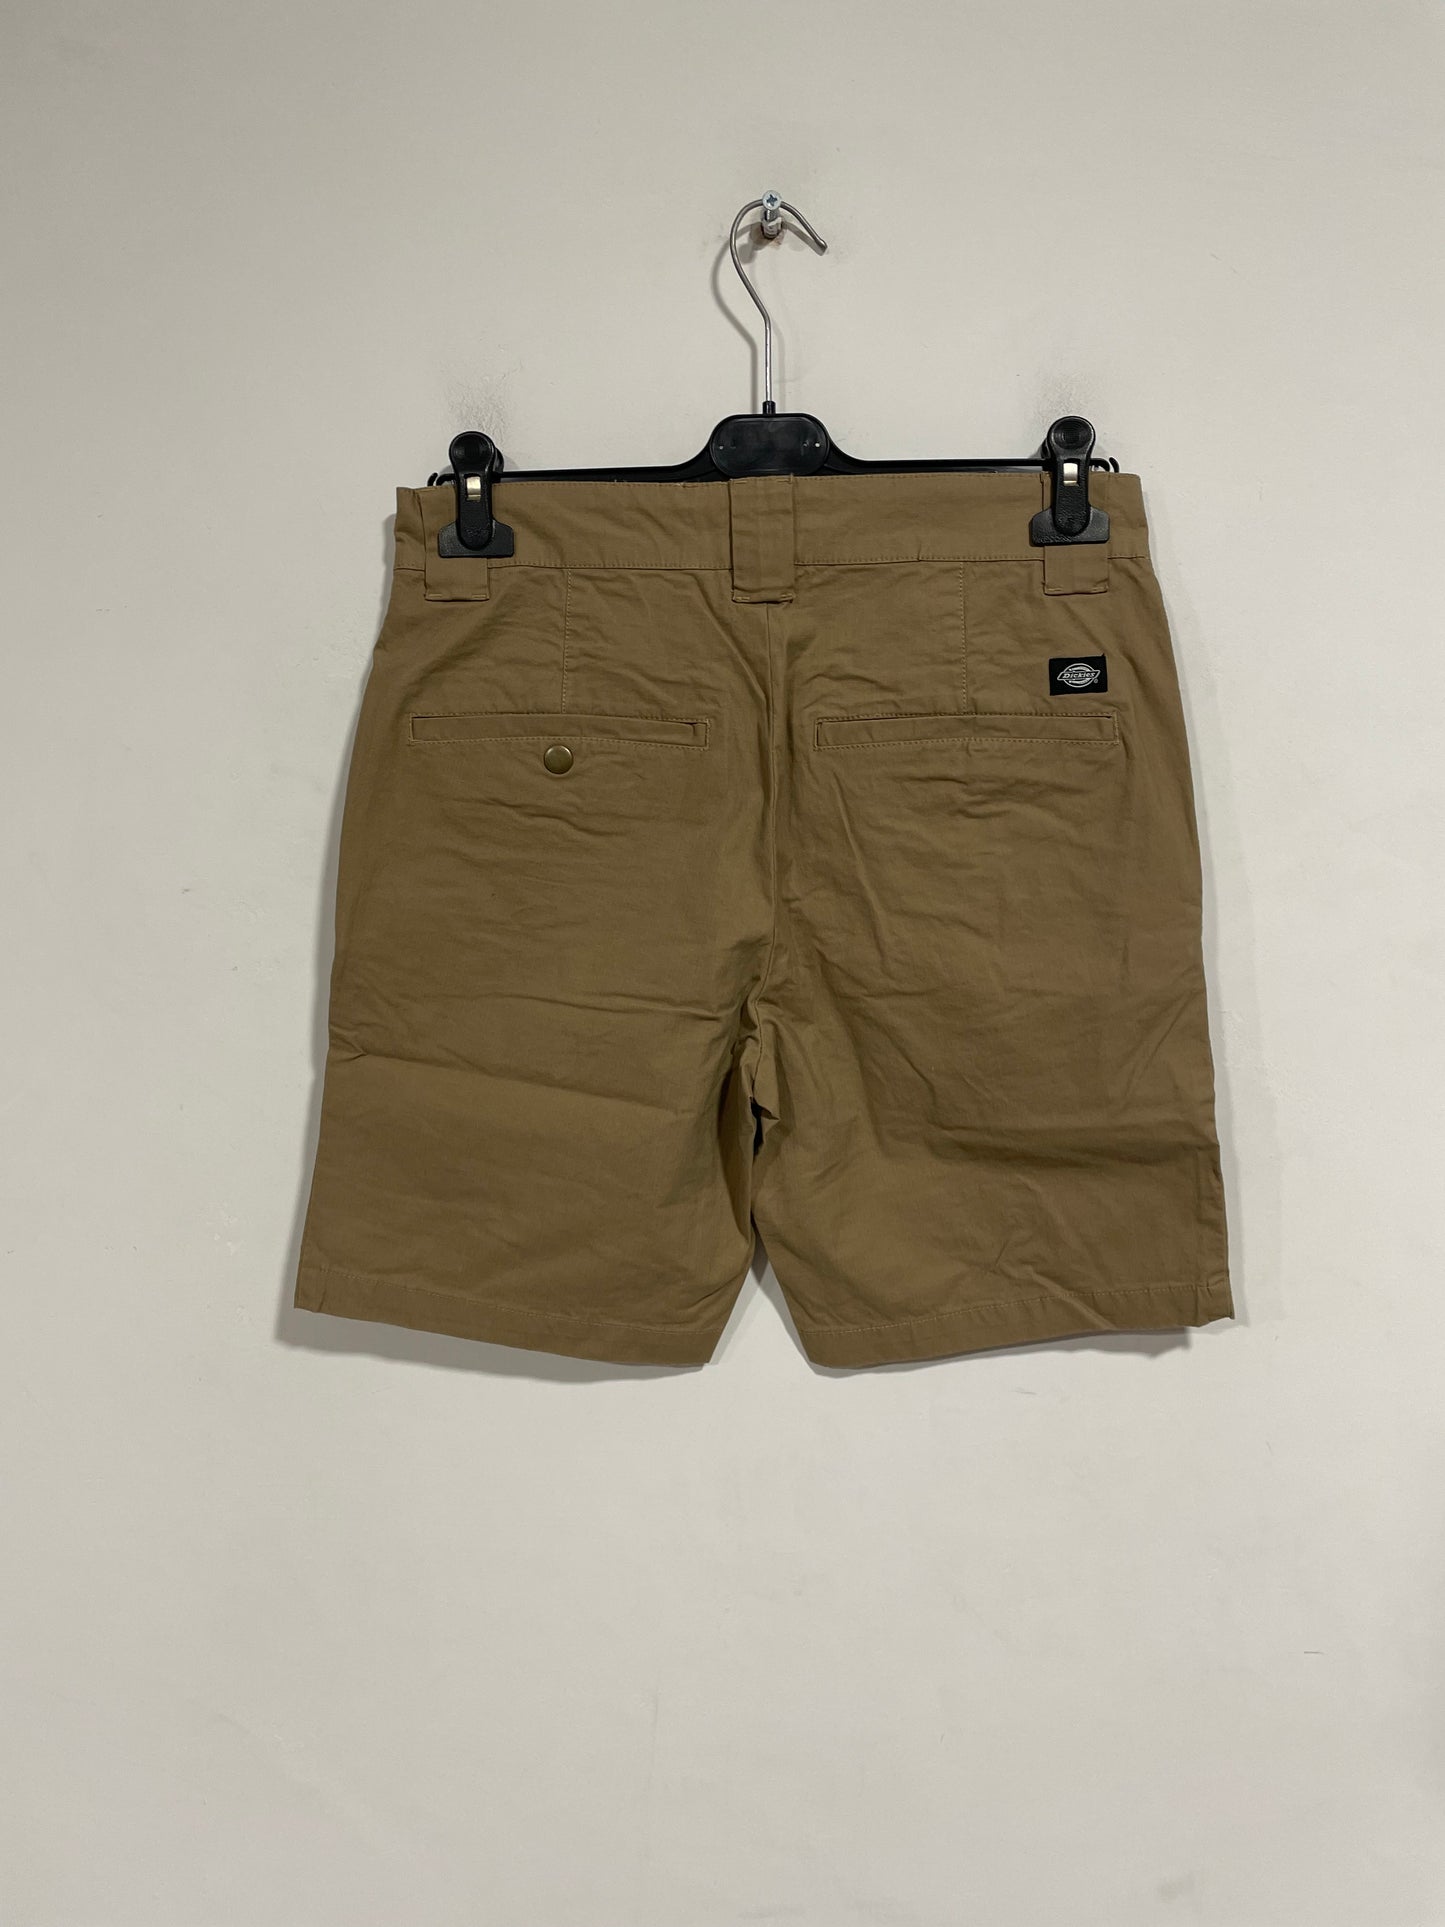 Shorts Dickies beige nuovo con cartellino (D693)